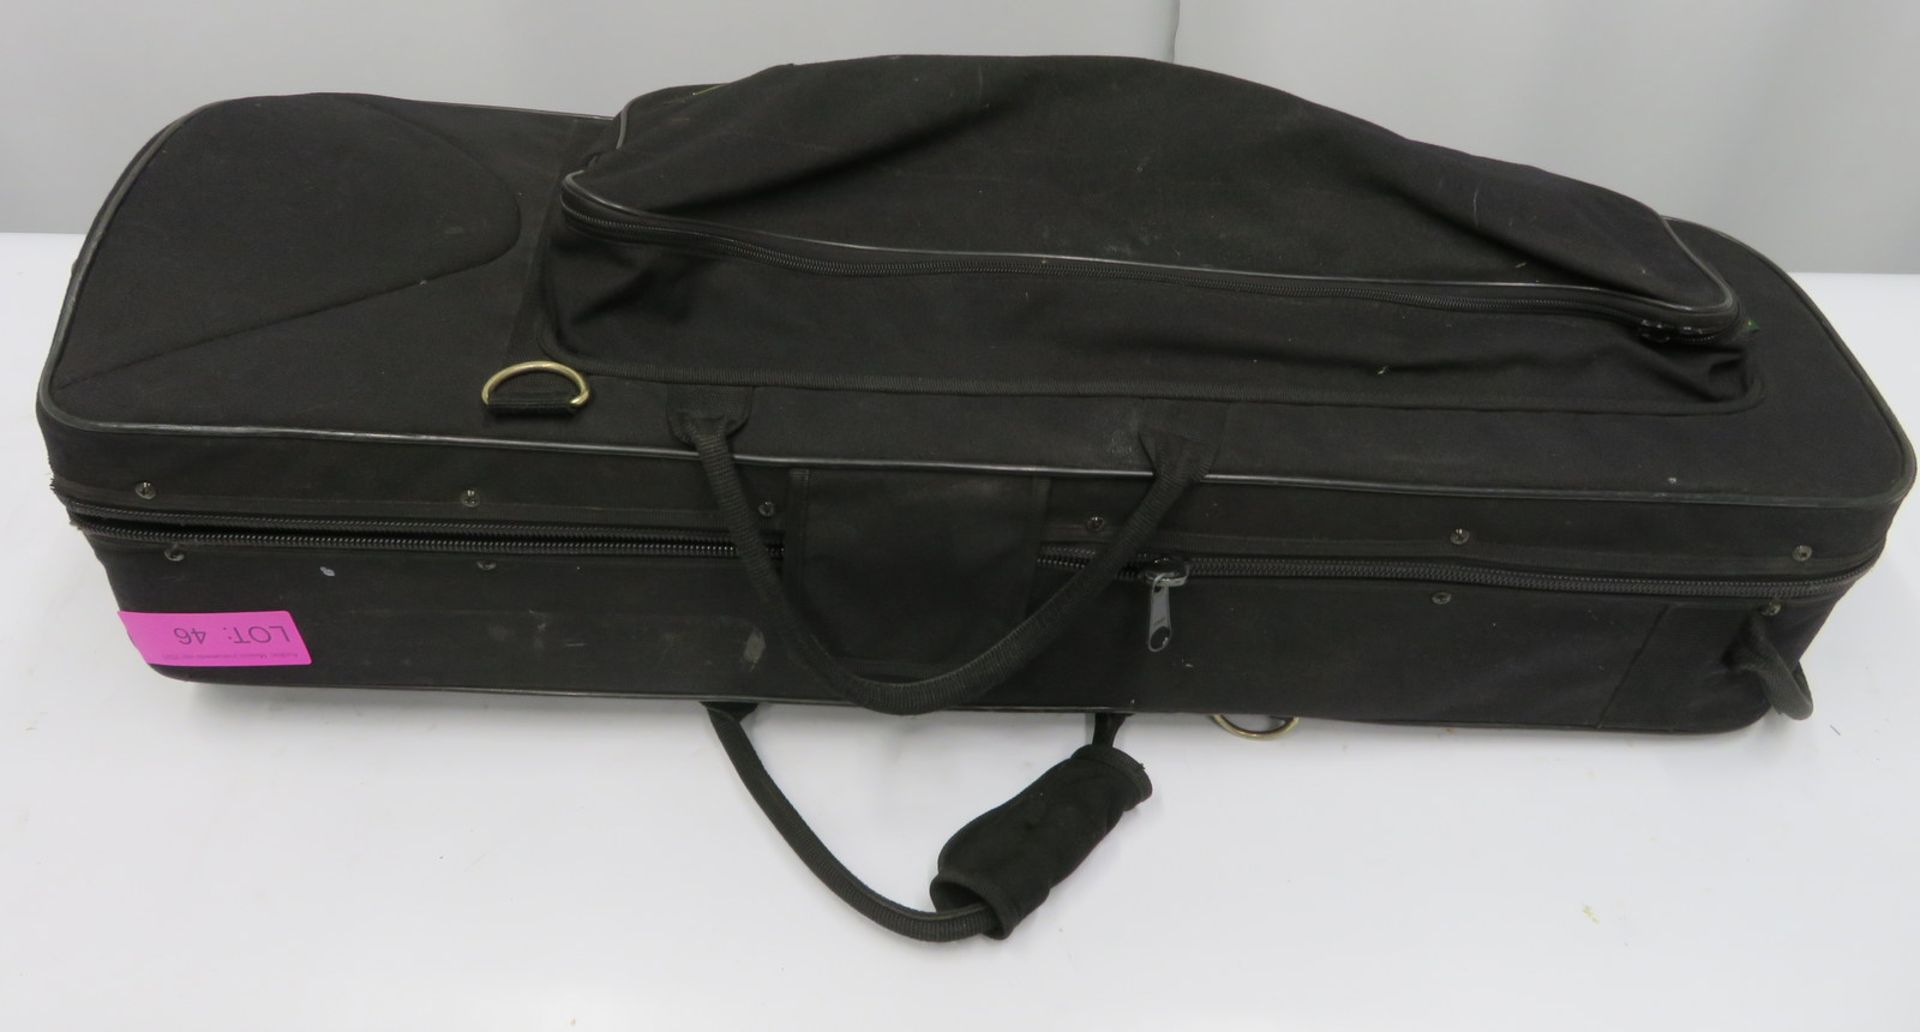 Rath R4 trombone with case. Serial number: R4140. - Image 19 of 19